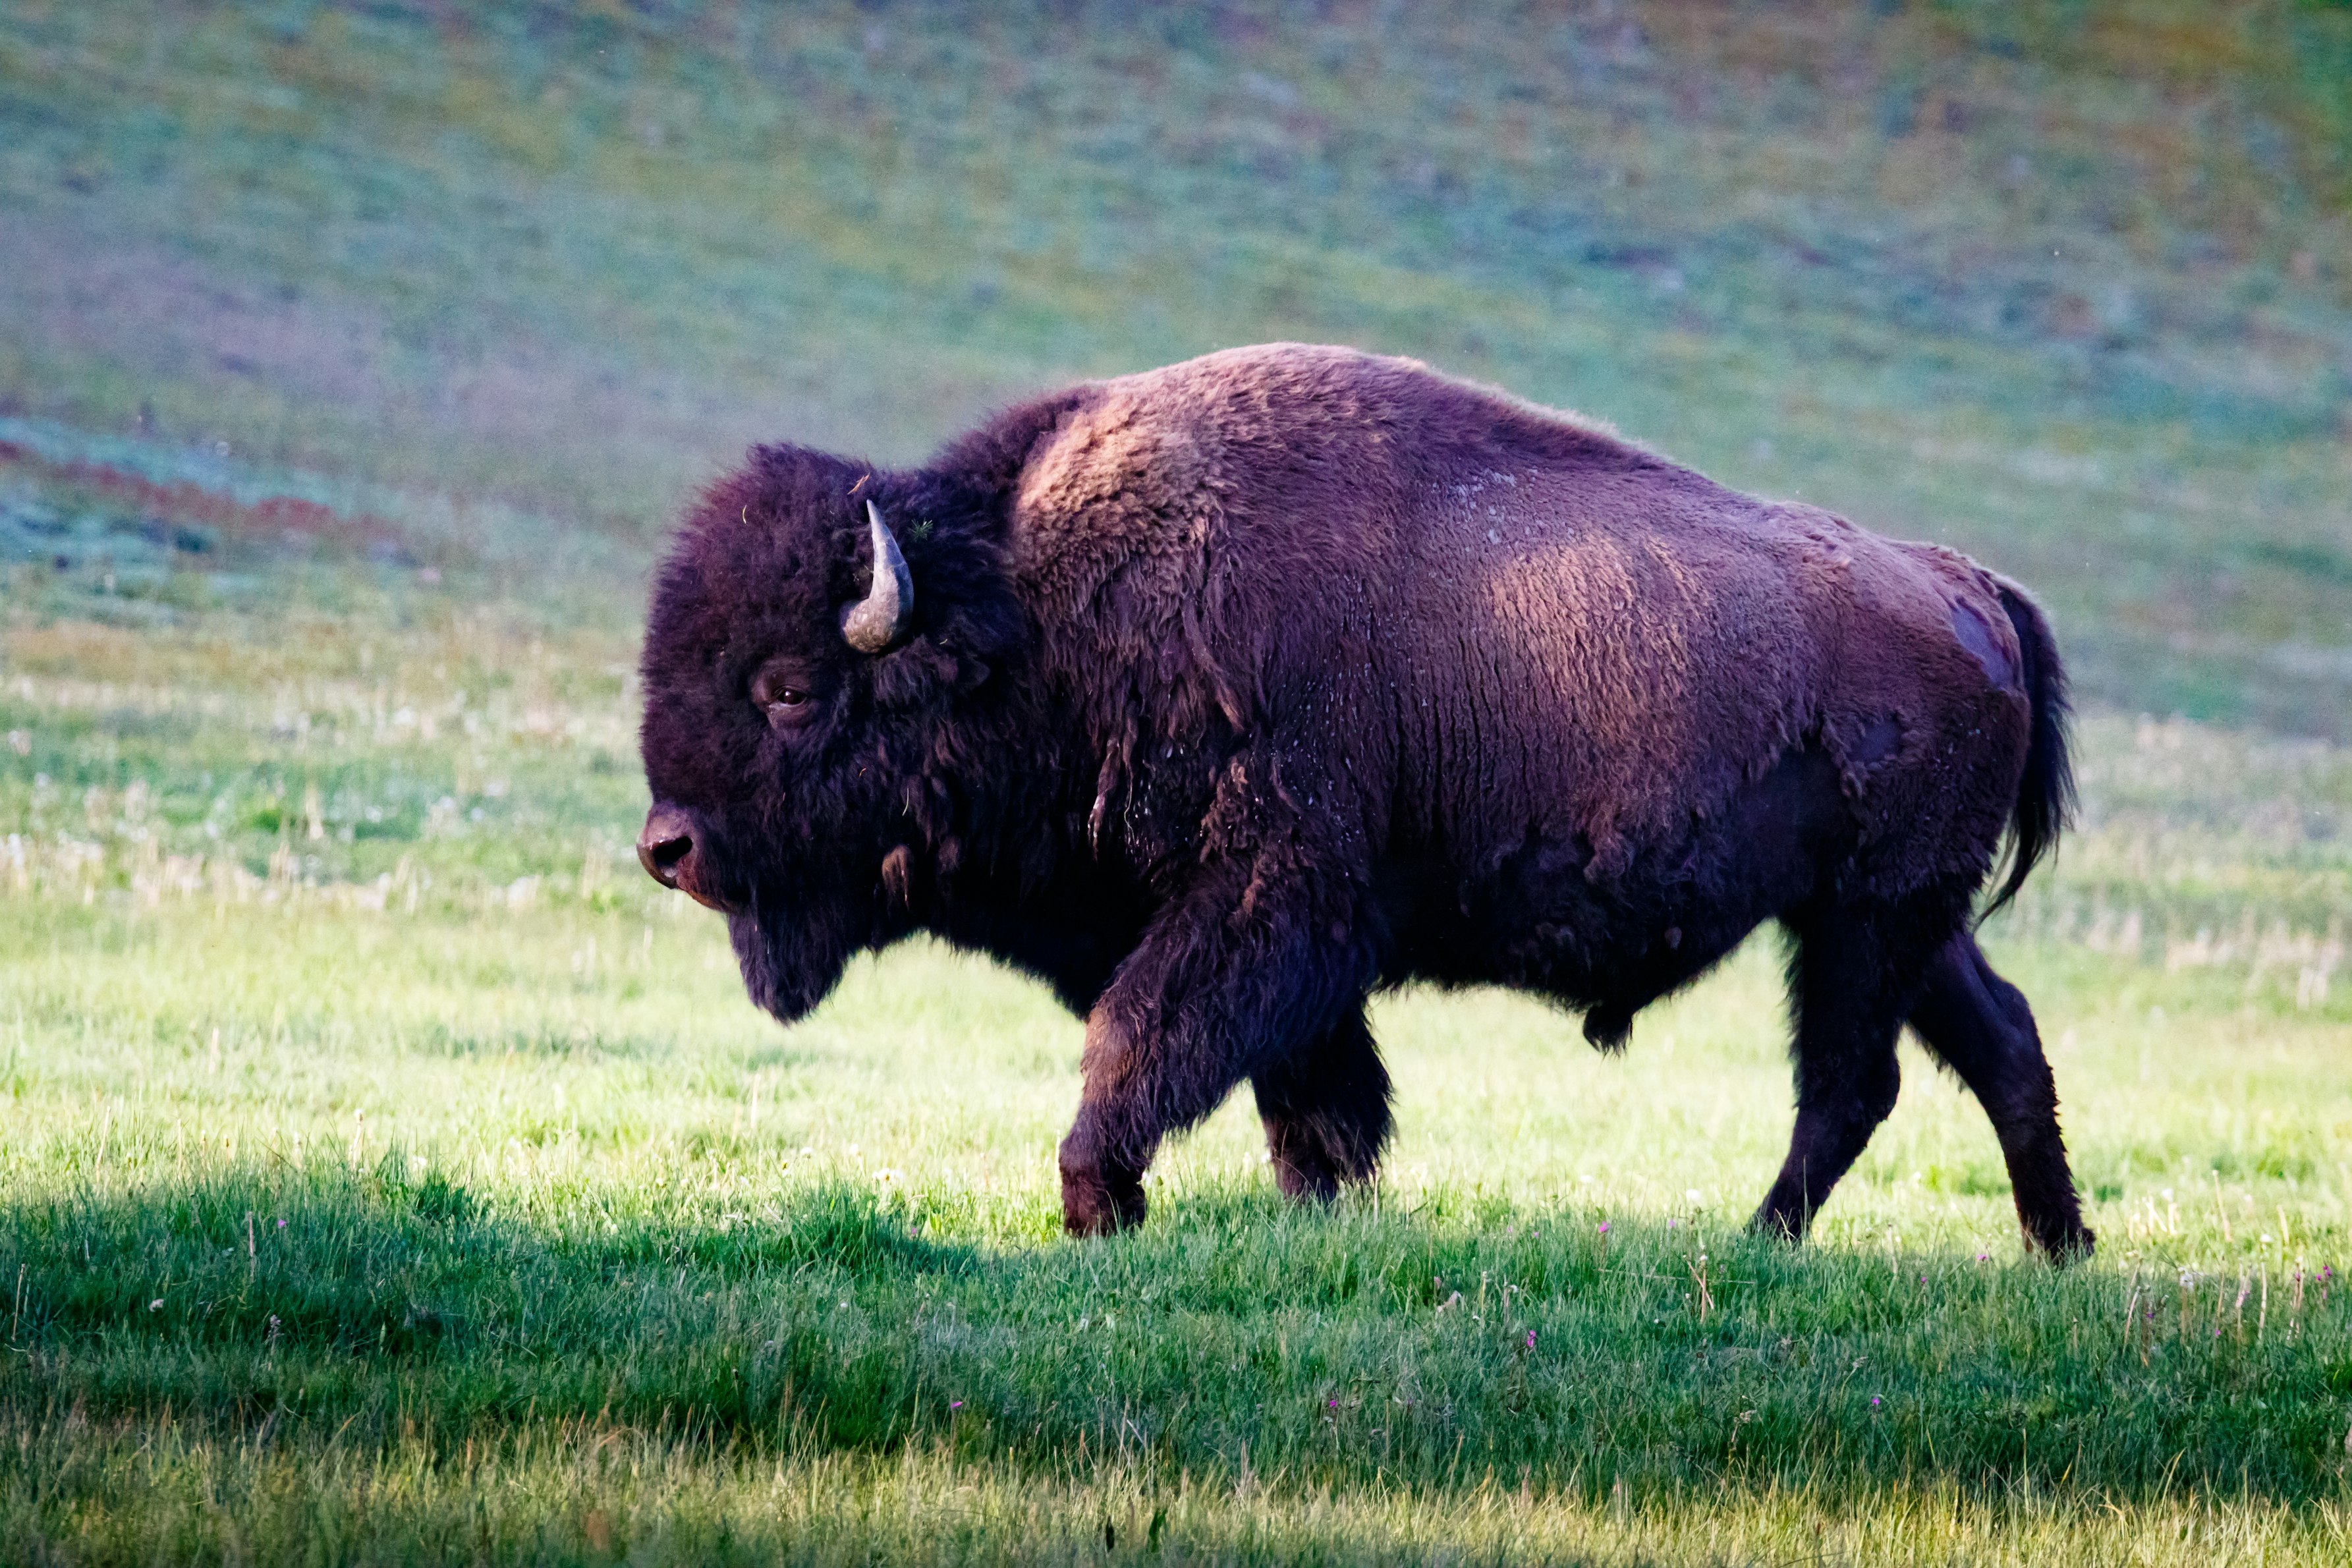 He Spent Decades Protecting Buffalo. A Microscopic Invader Threatens That Work